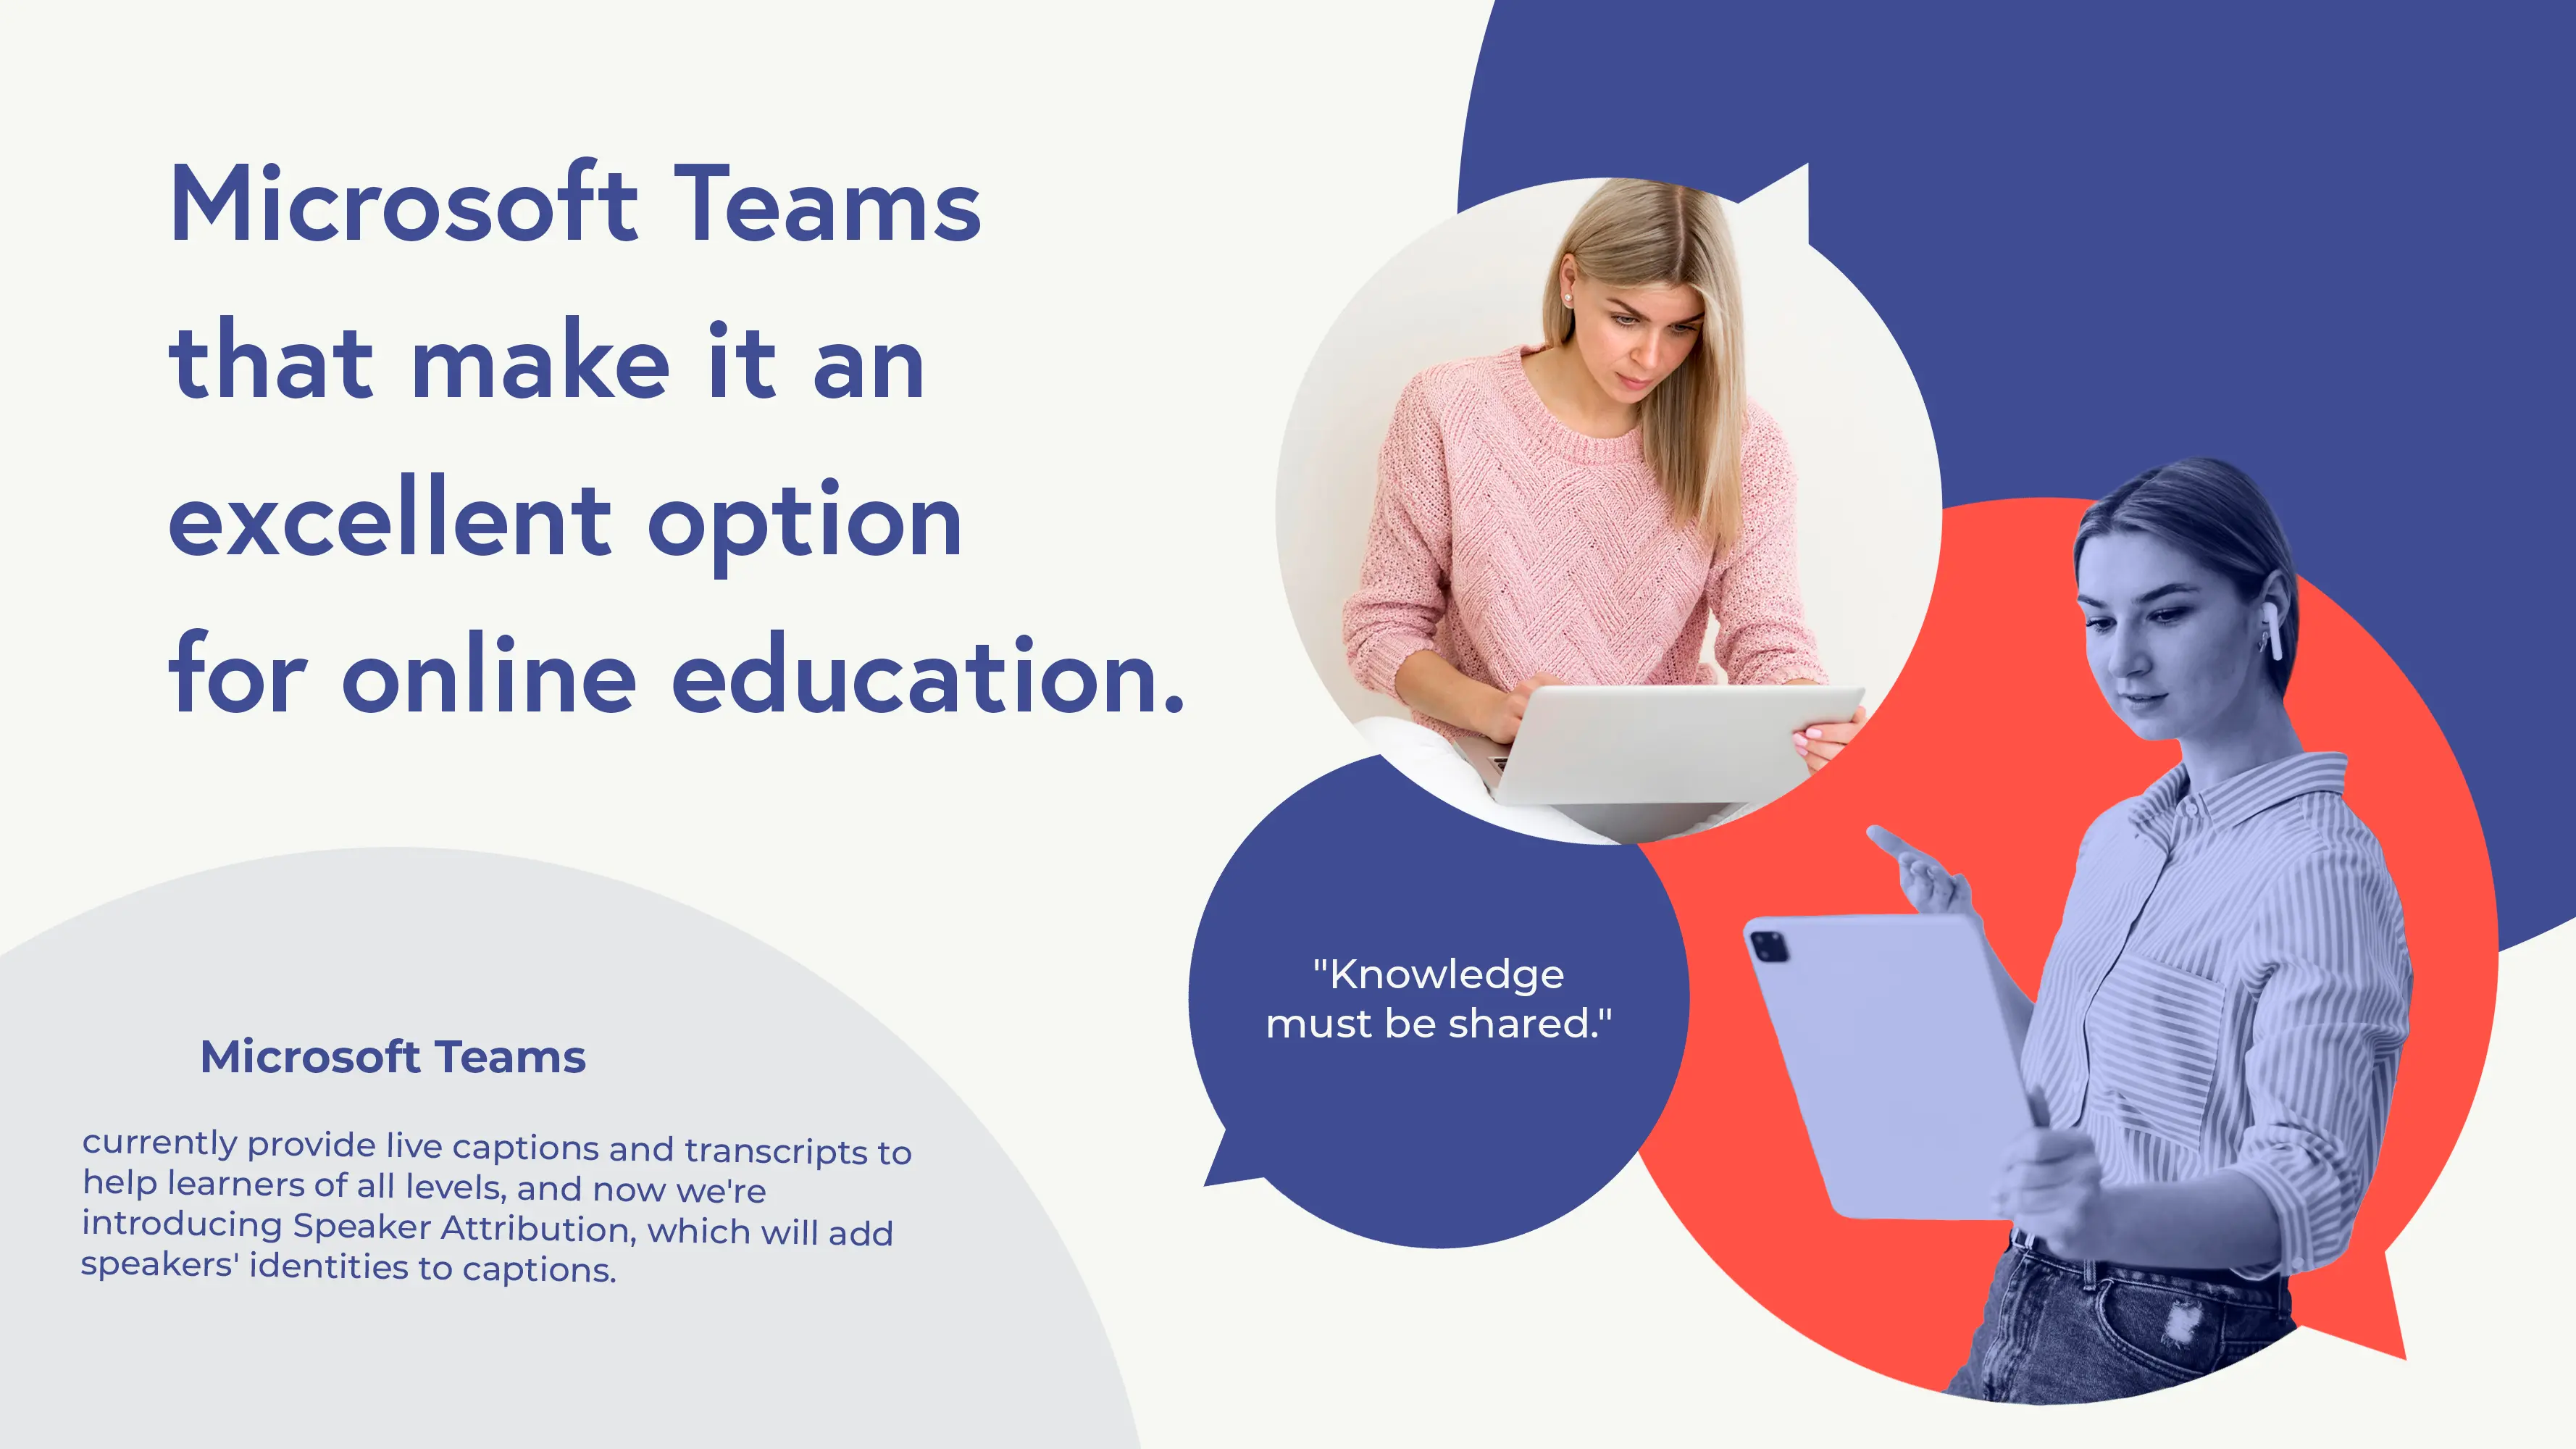 Features of Microsoft Teams that make it an excellent option for online education.